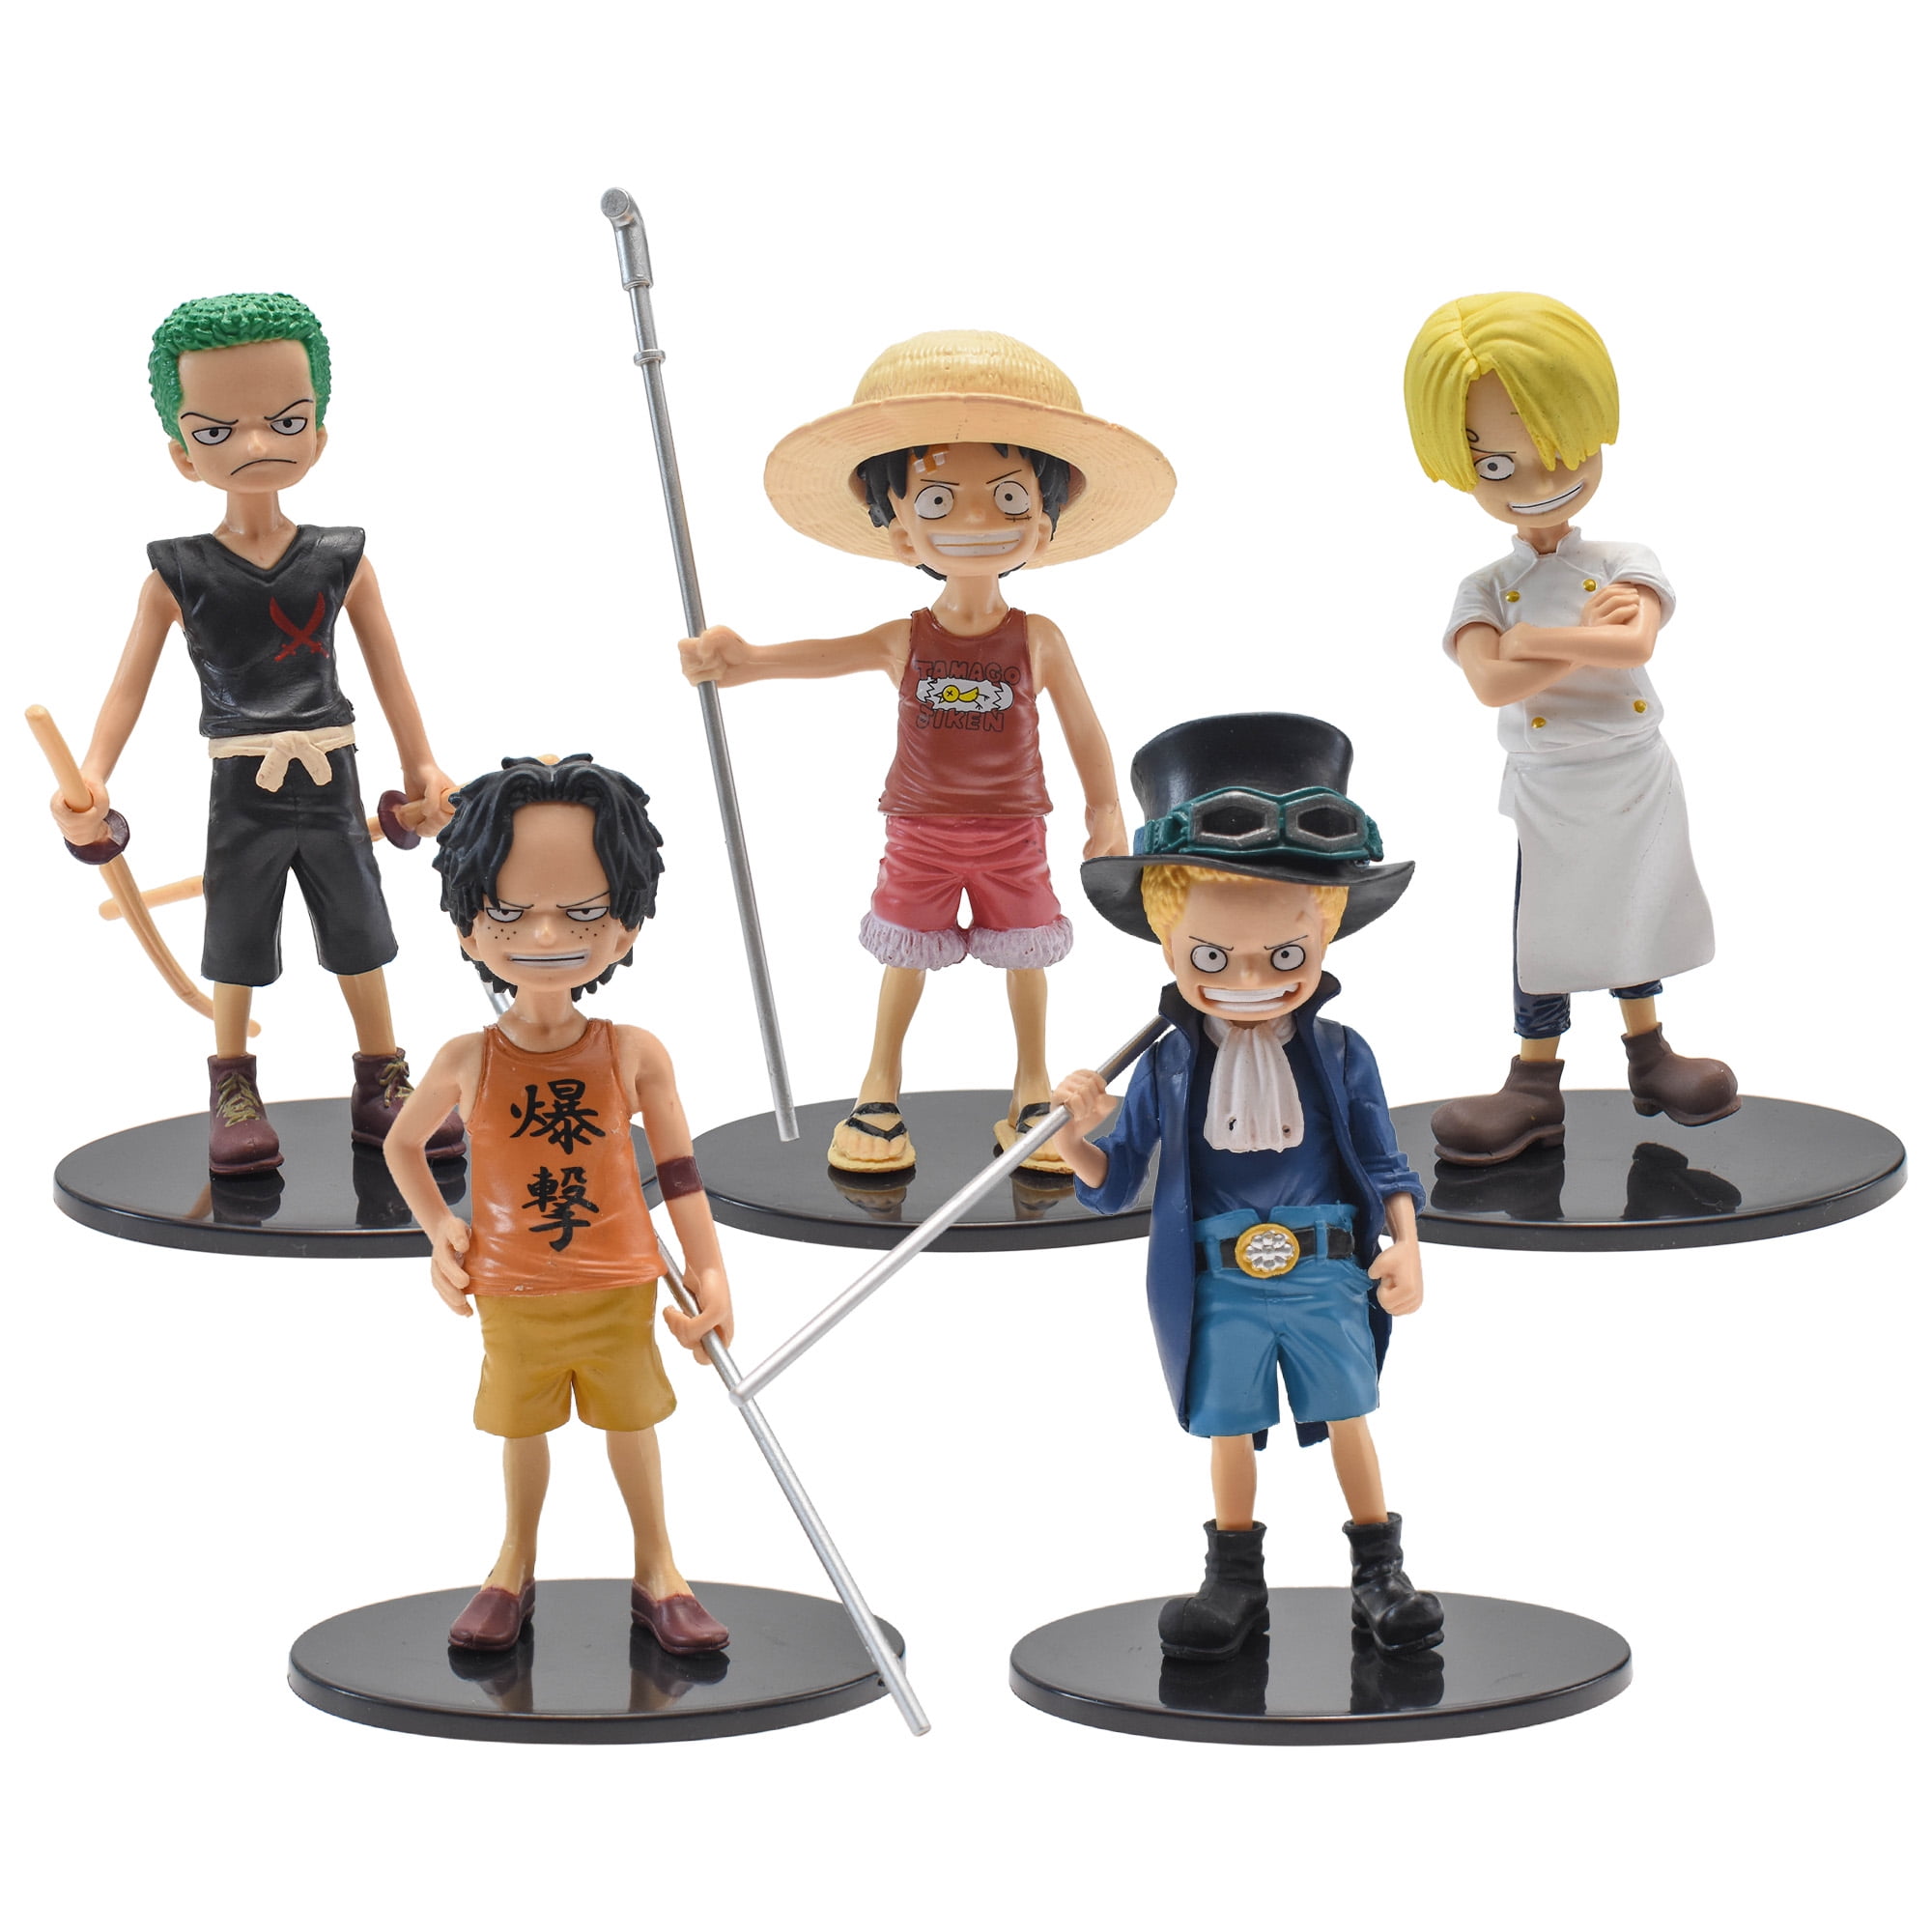 Anime Toys Collectible Doll Toy Gift For Anime Fans One Piece Anime Roronoa Zoro Luffy Figure Sanji Sabo Portgas D Ace Figurine Collectible Model Toy-2Action Figure Pvc Model Figure Toy Doll For